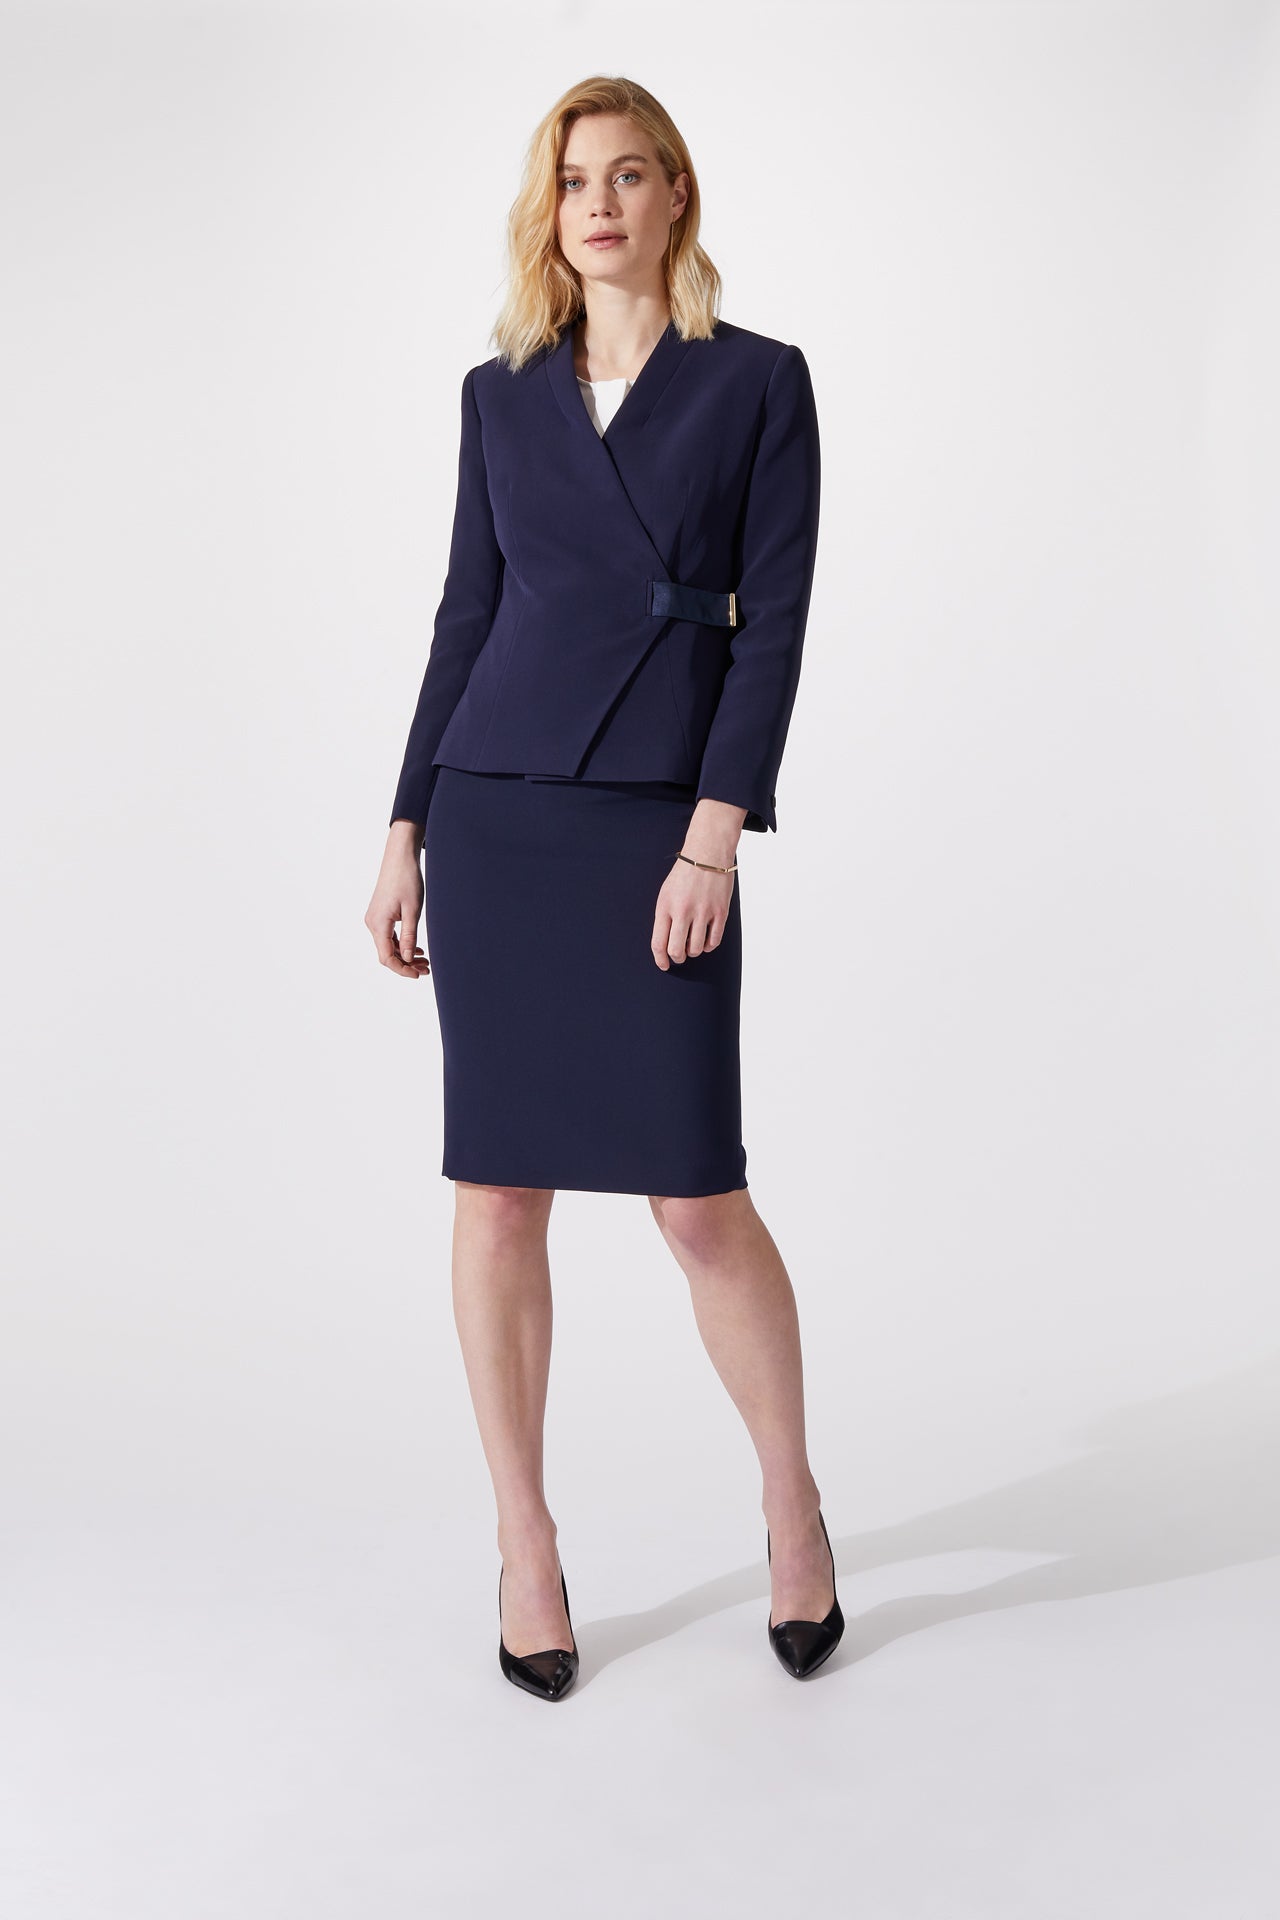 Winchester Navy Suiting Jacket - Libby London